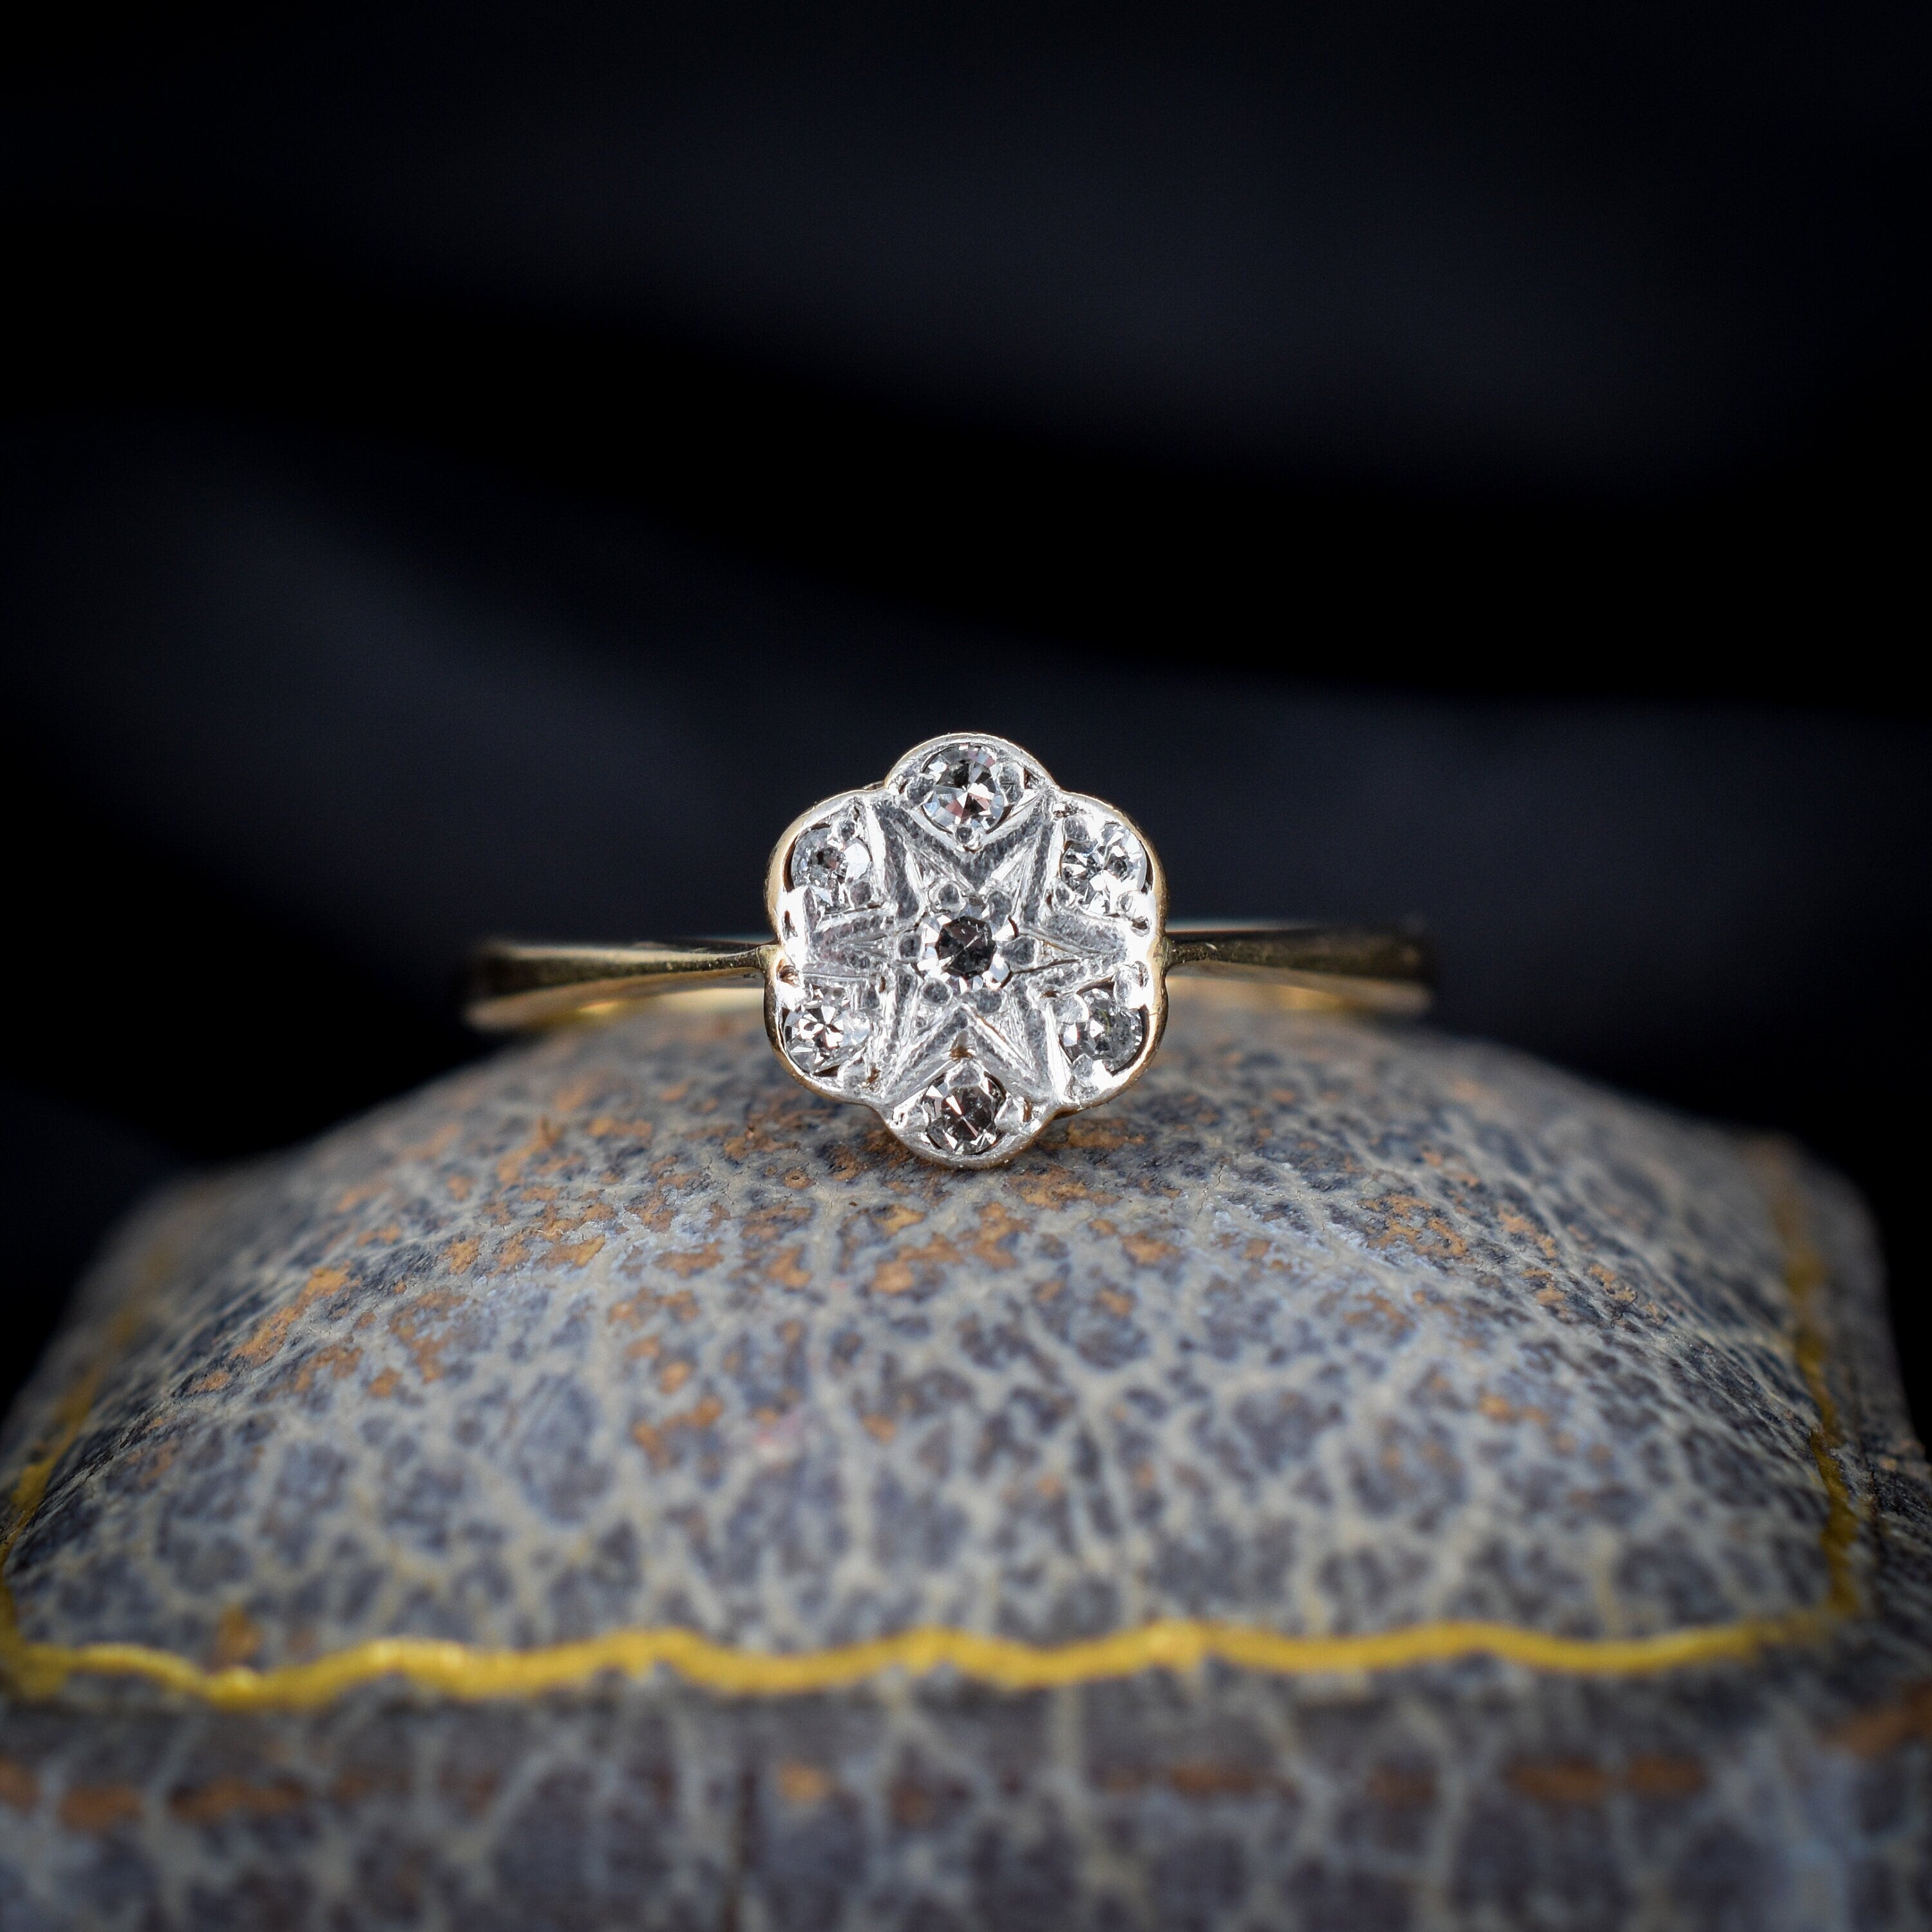 Beautiful antique Edwardian engagement ring featuring old European cut  diamonds throughout in an elegant low profile setting. | Instagram